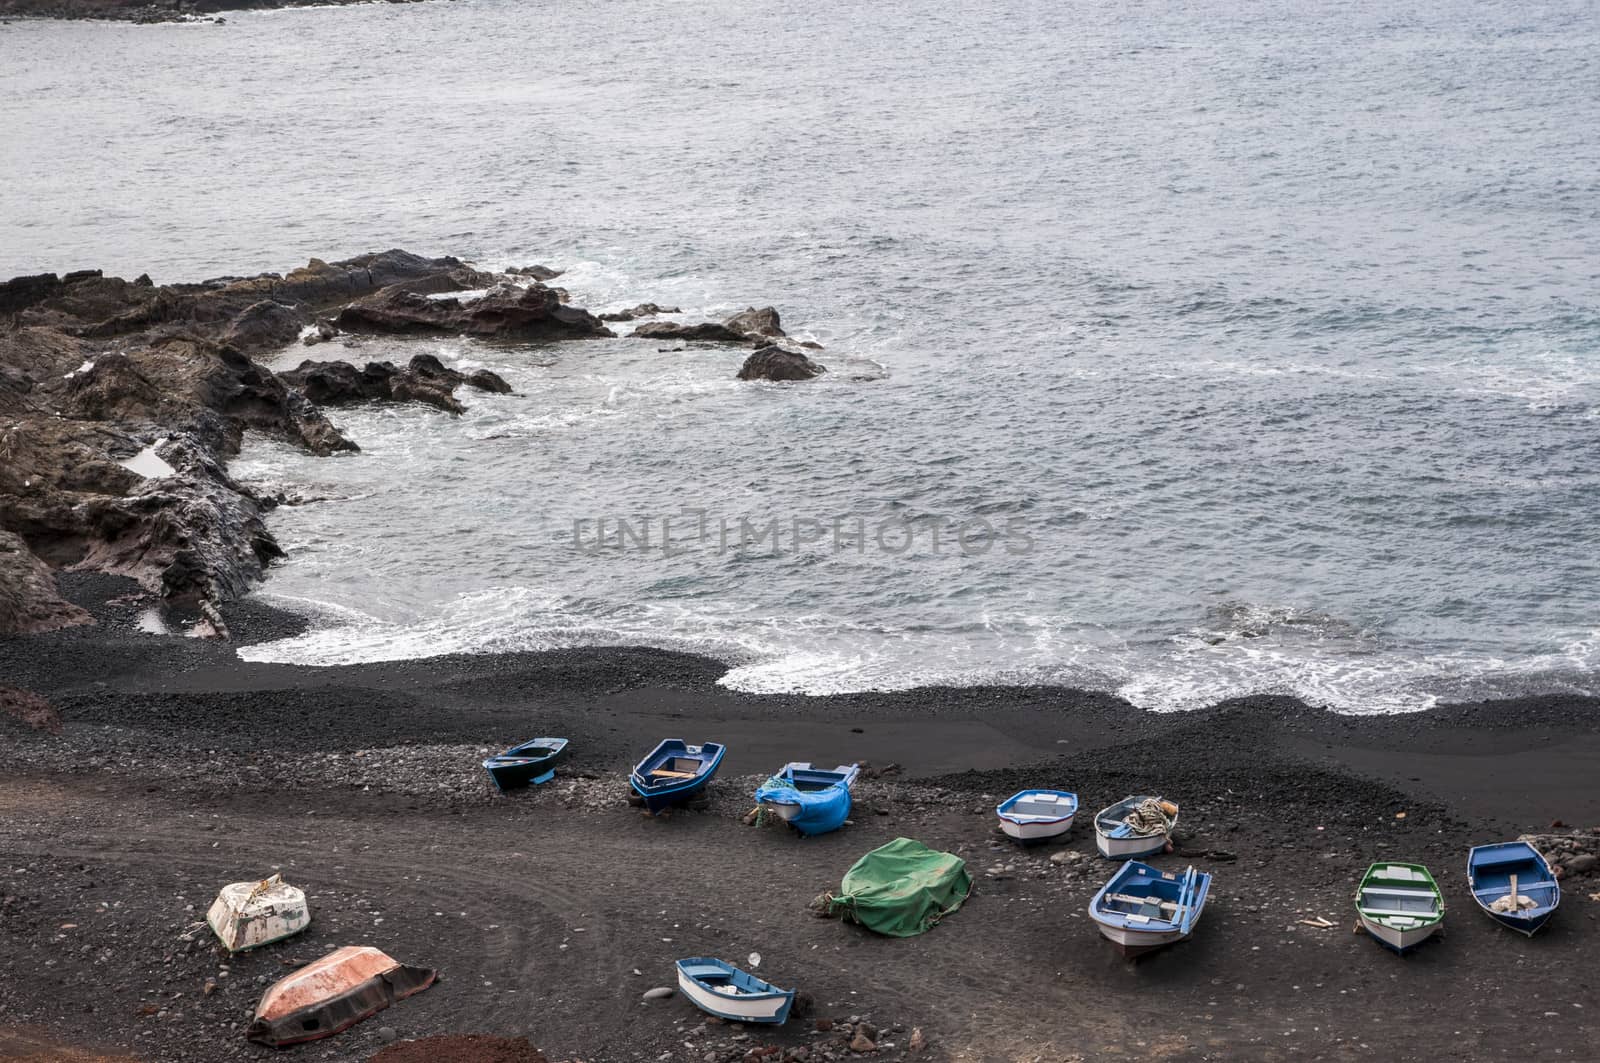 Lanzarote beach full of boats of all colors